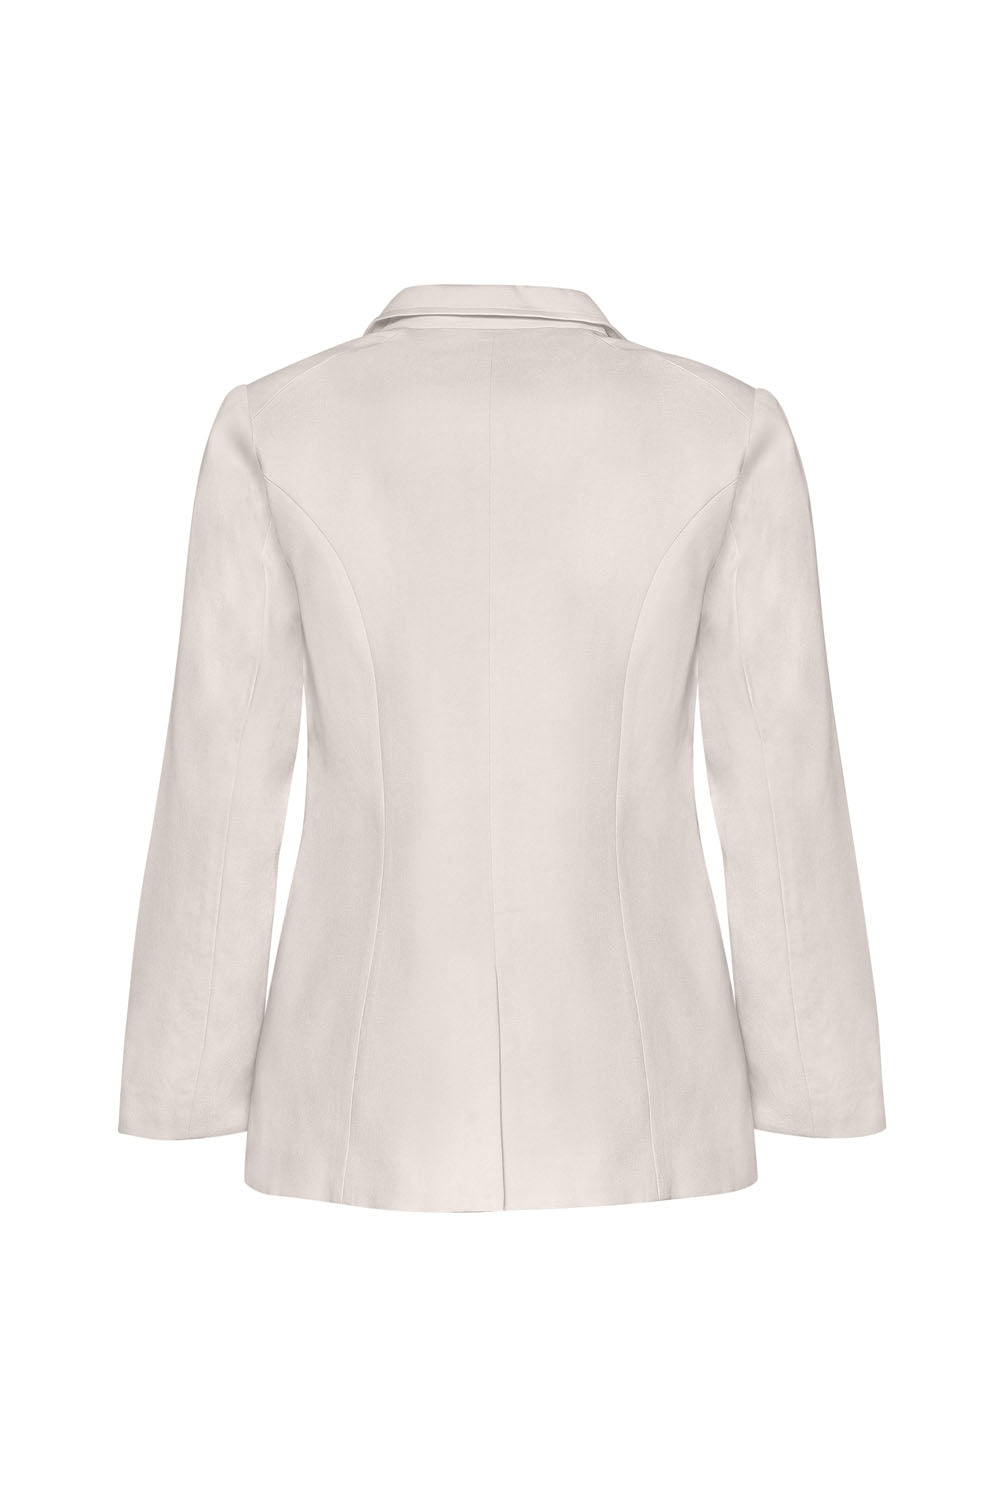 MADLY SWEETLY SMOOTH BLAZER - STONE - THE VOGUE STORE